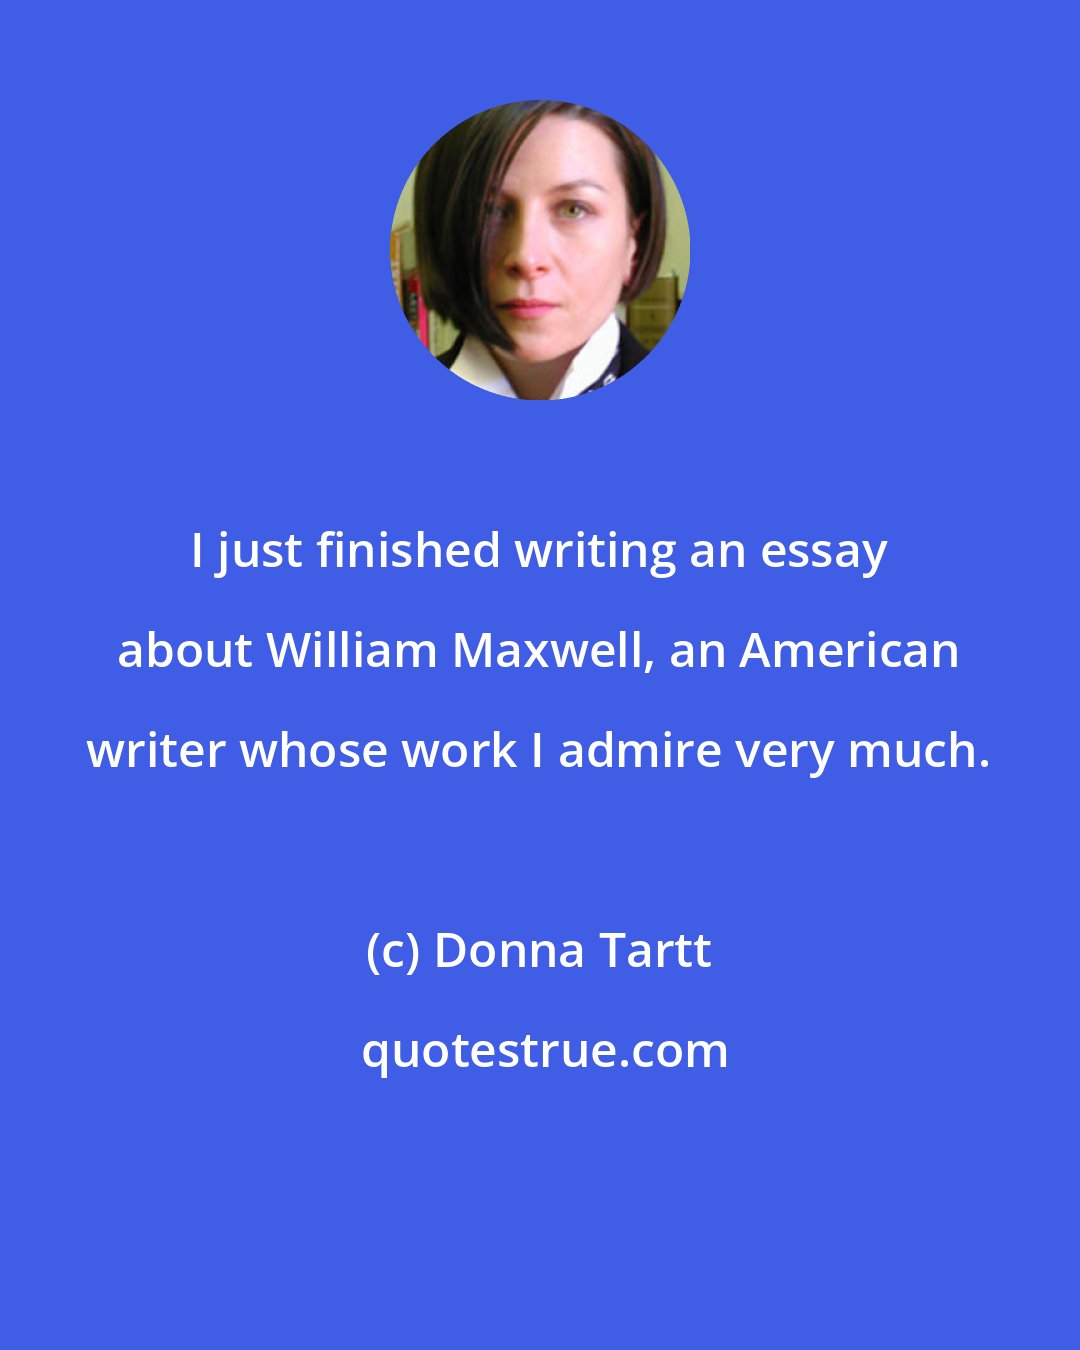 Donna Tartt: I just finished writing an essay about William Maxwell, an American writer whose work I admire very much.